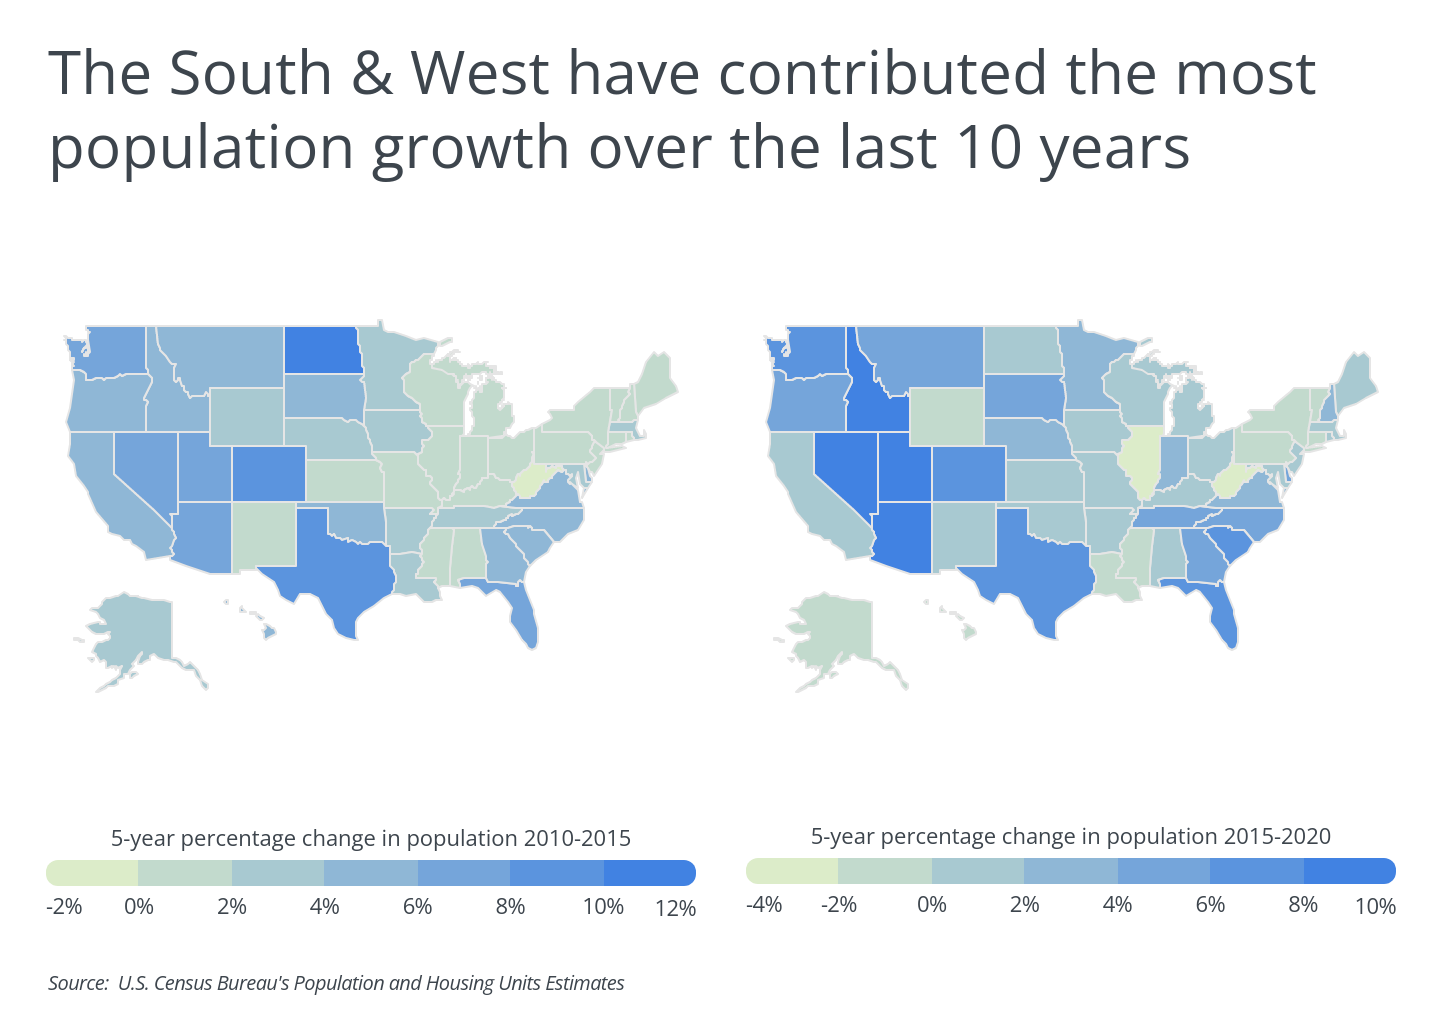 The South & West have contributed the most population growth over the last 10 years